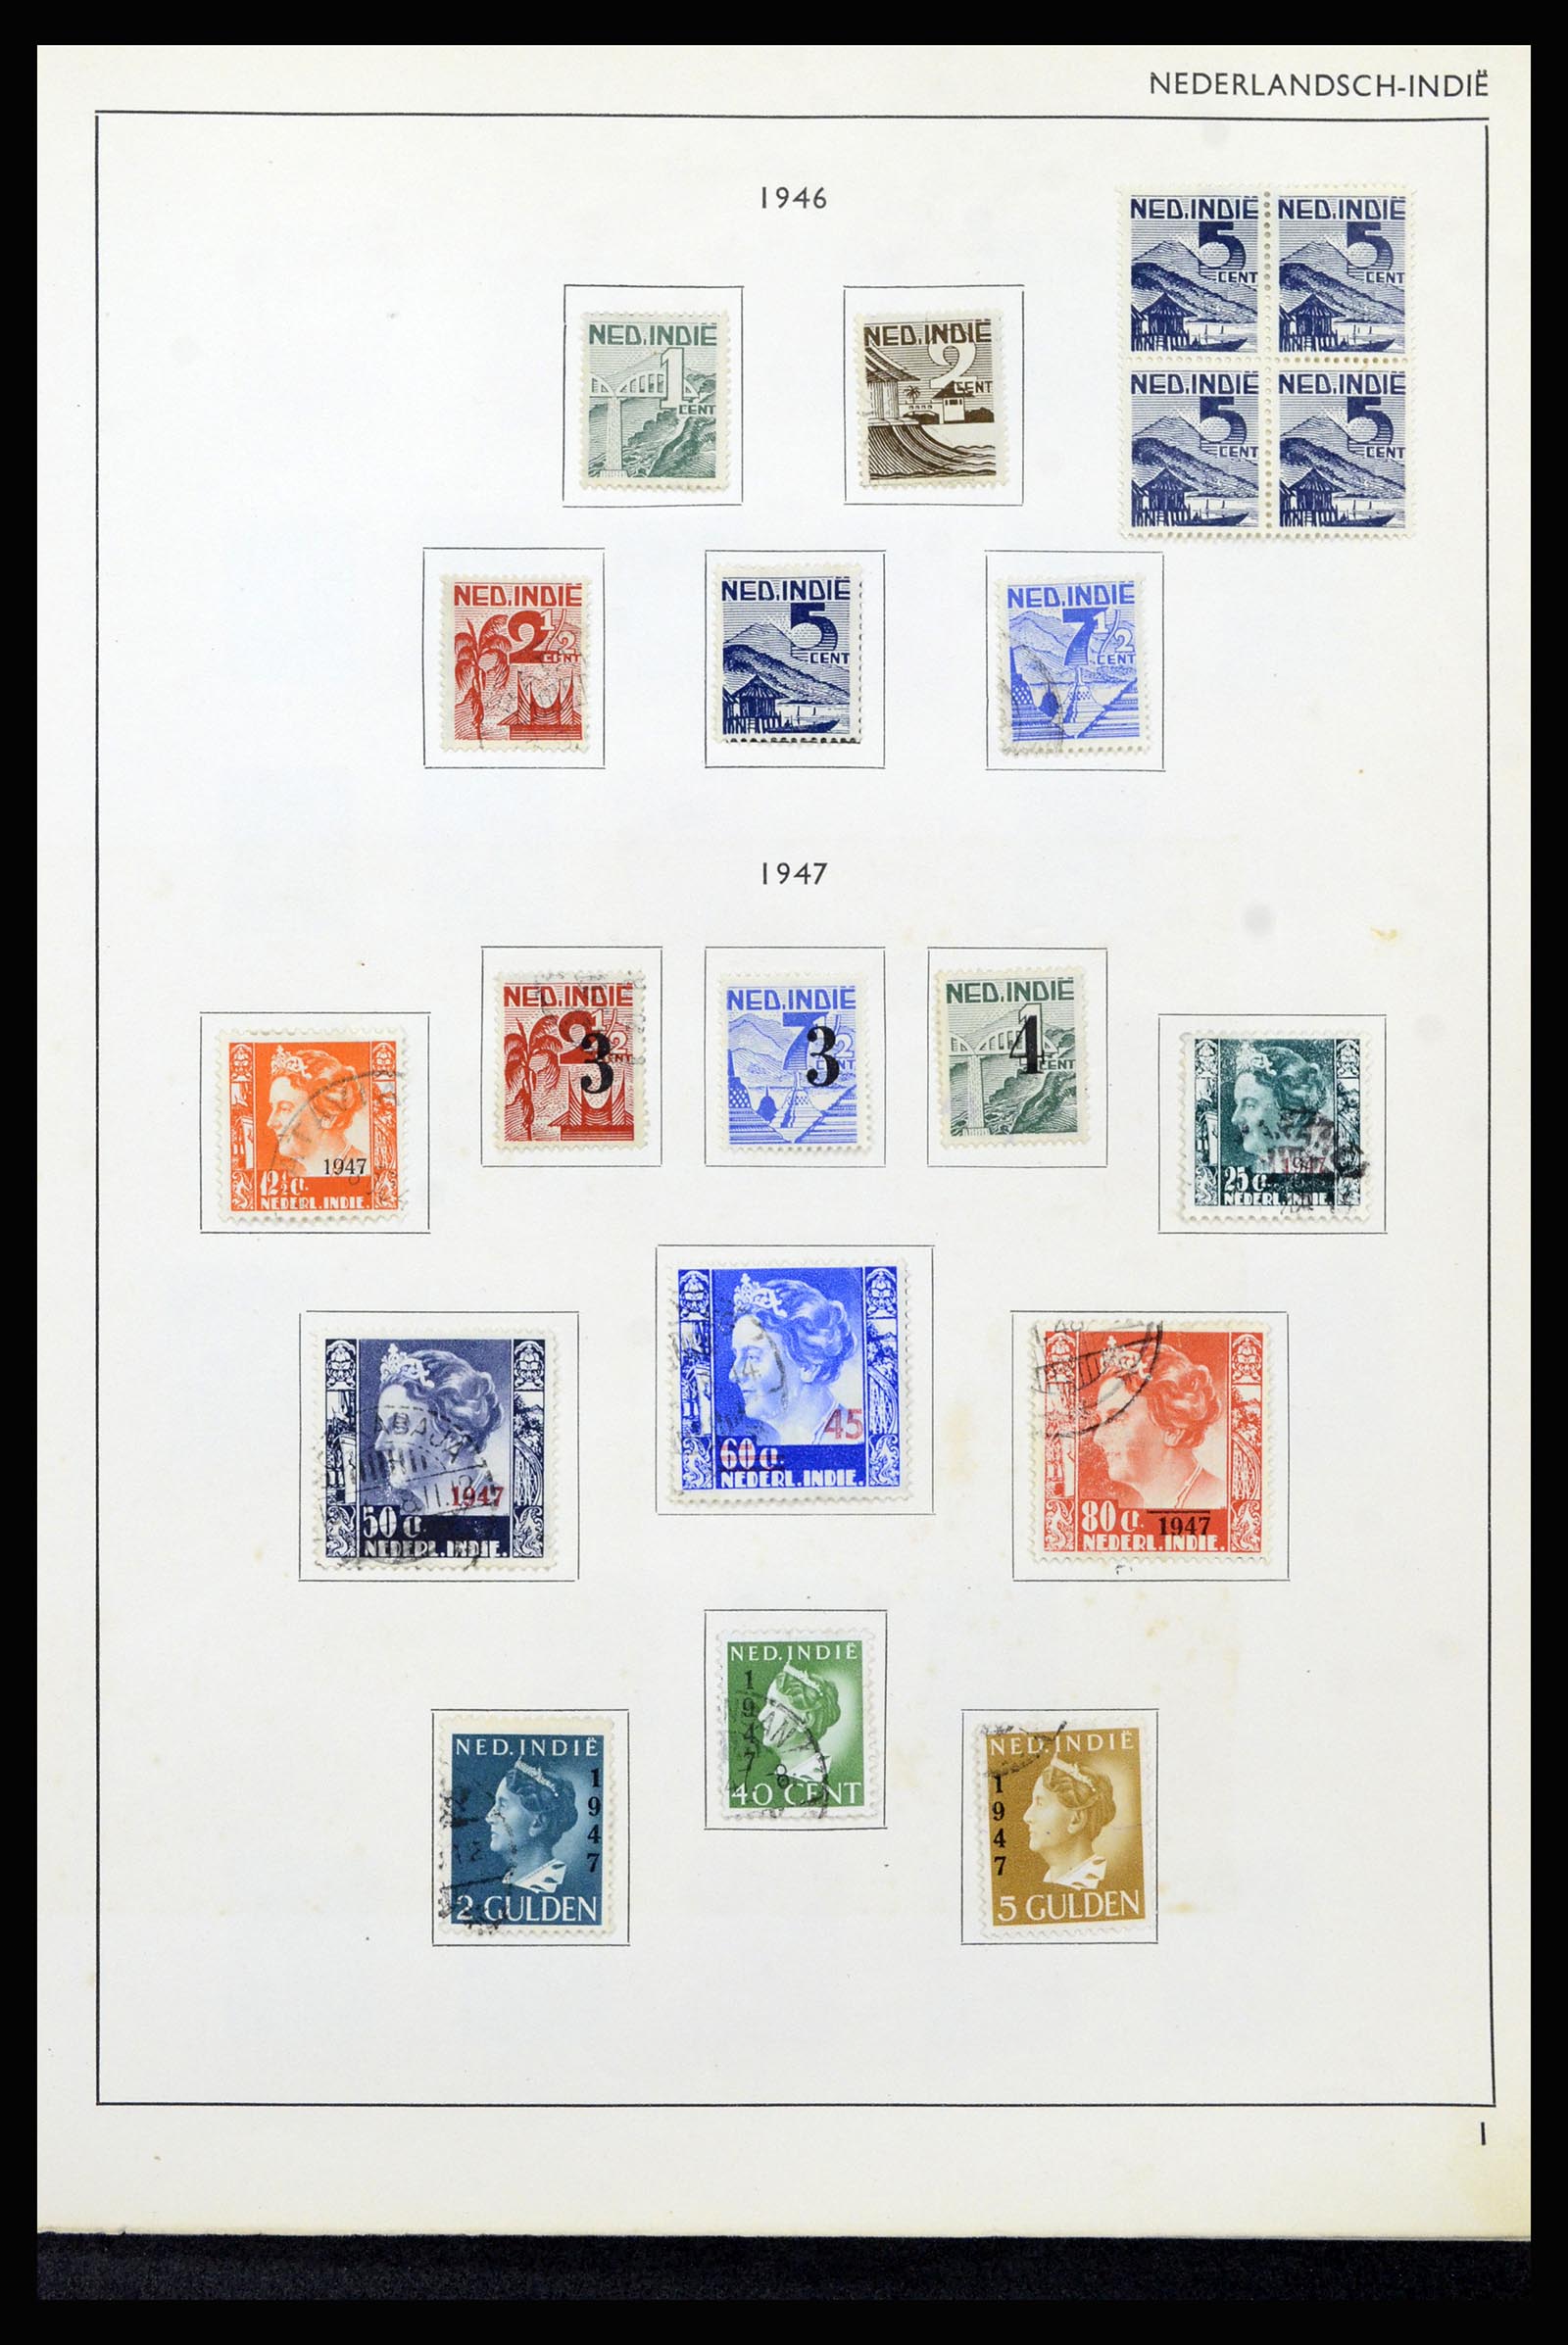 37217 021 - Stamp collection 37217 Dutch territories 1864-1975.